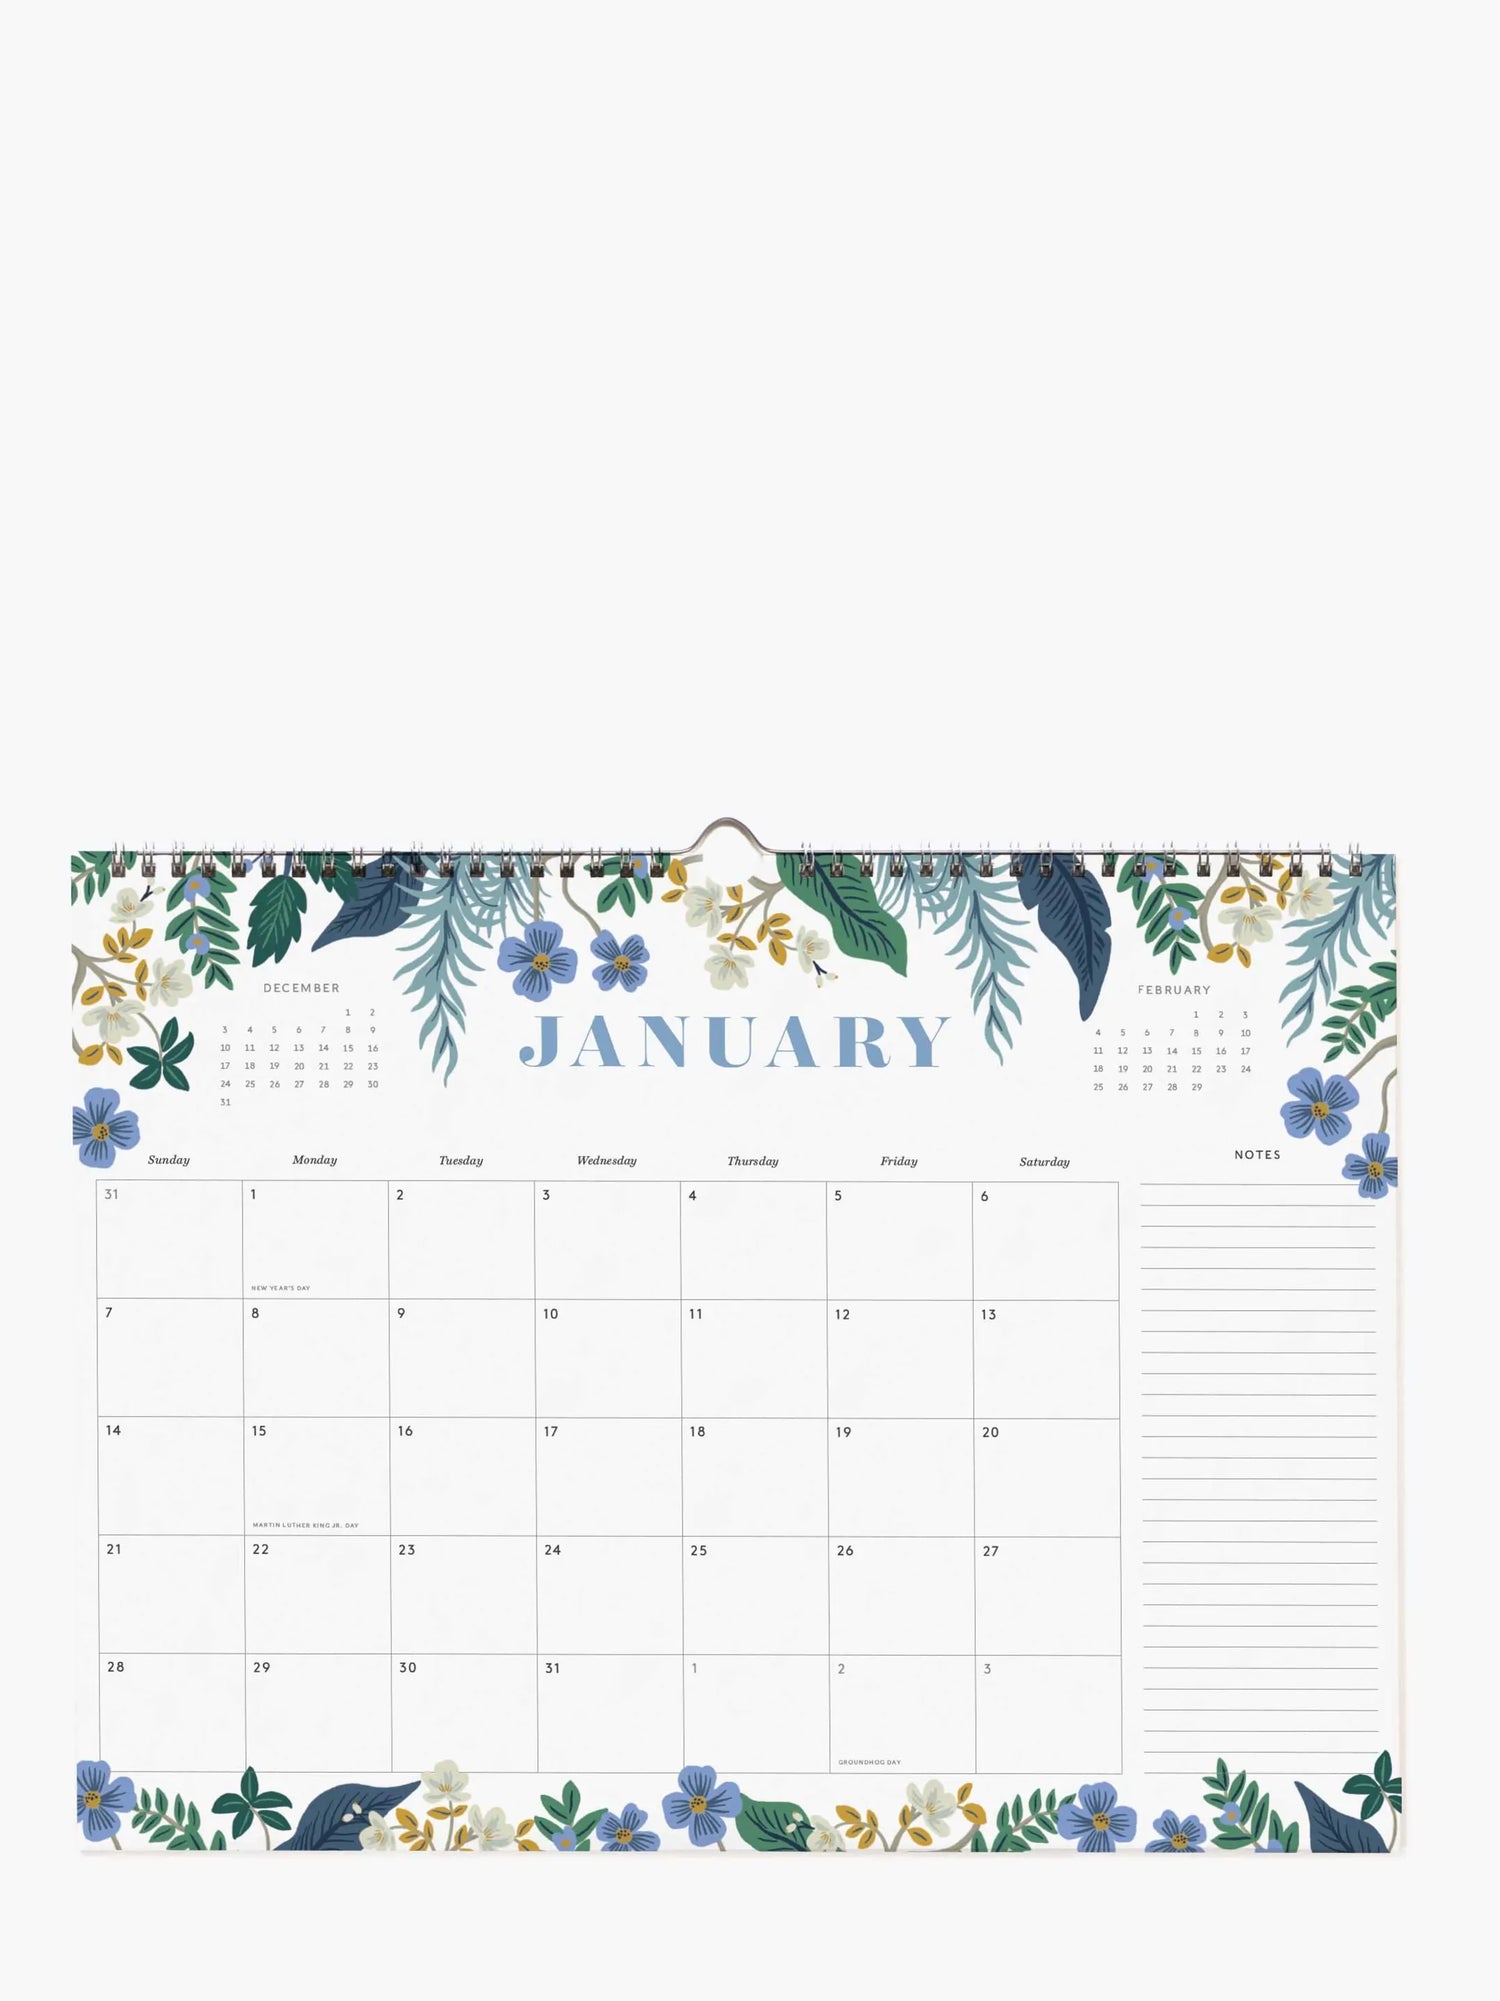 Blossom Appointment 2024  - wall calendar